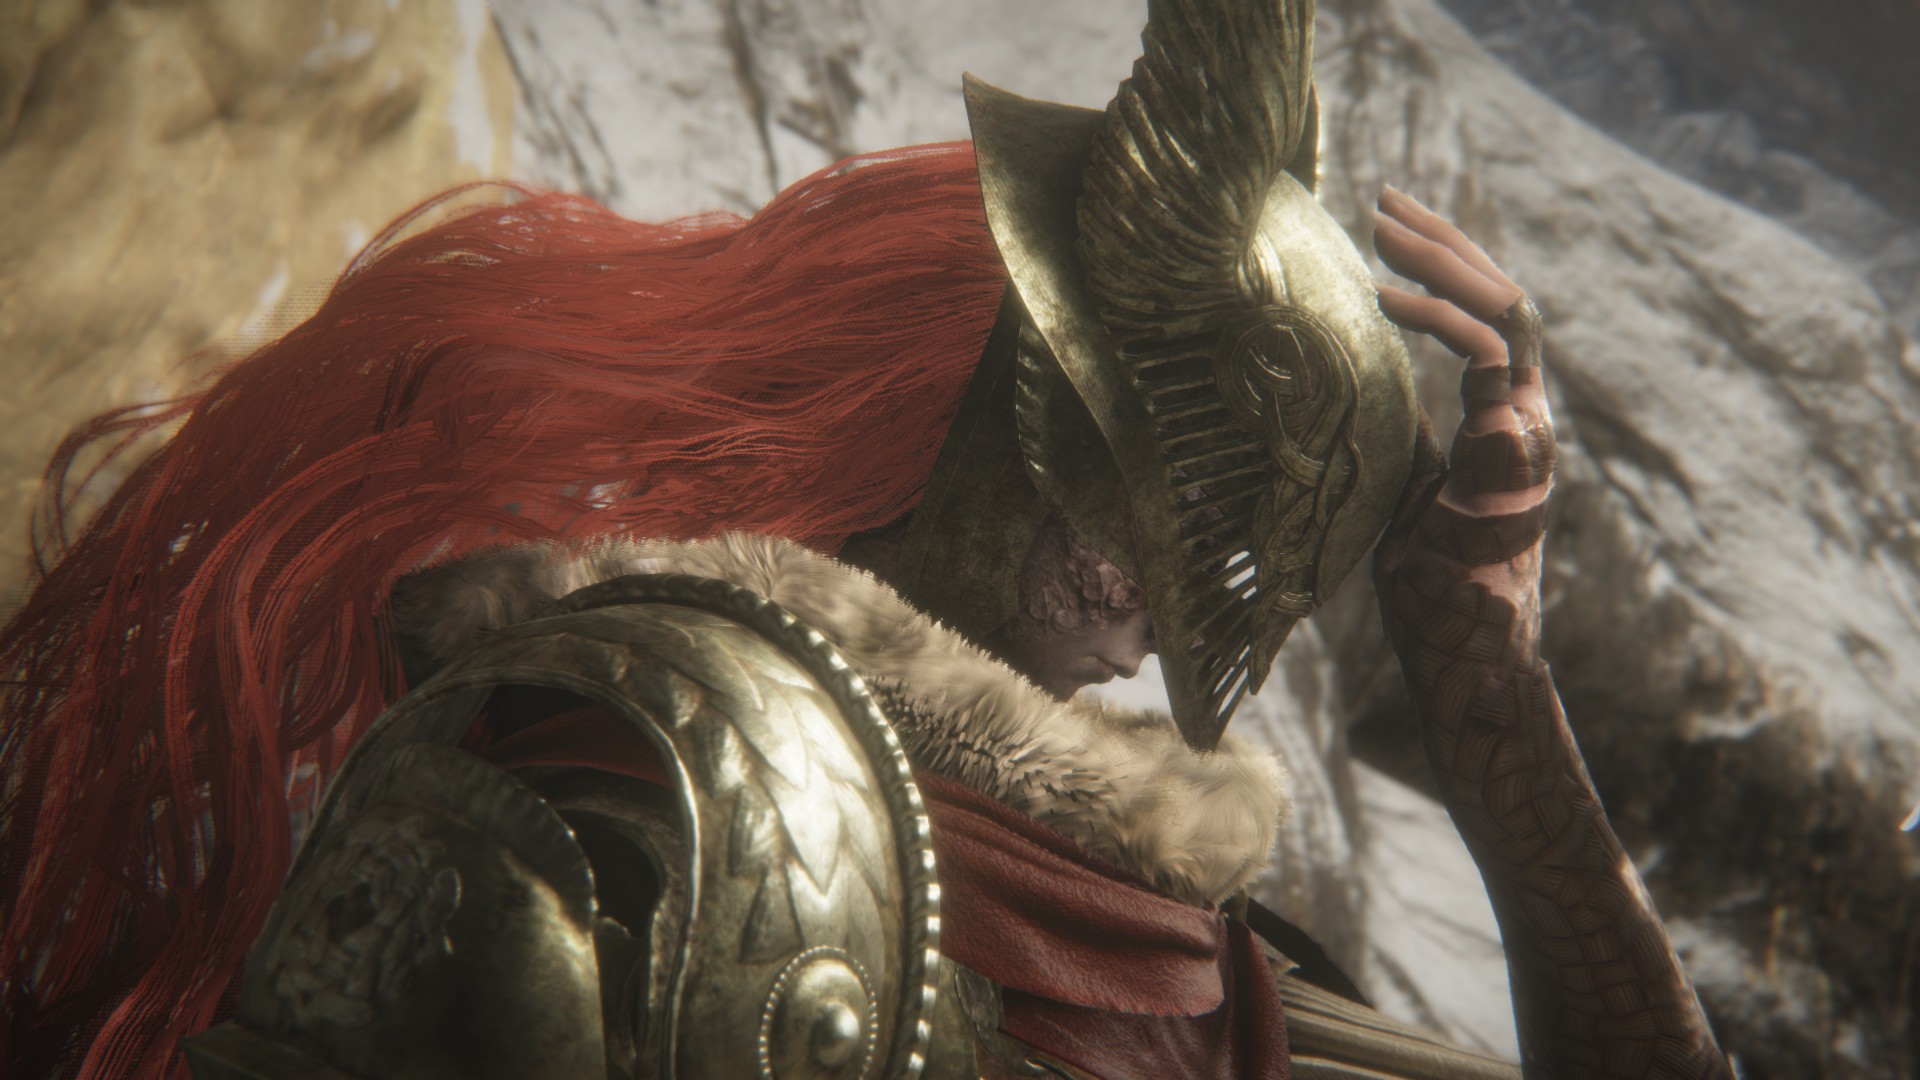 One determined modder managed to cram Elden Ring’s hardest boss into Sekiro, and she hardly seems to stand a chance